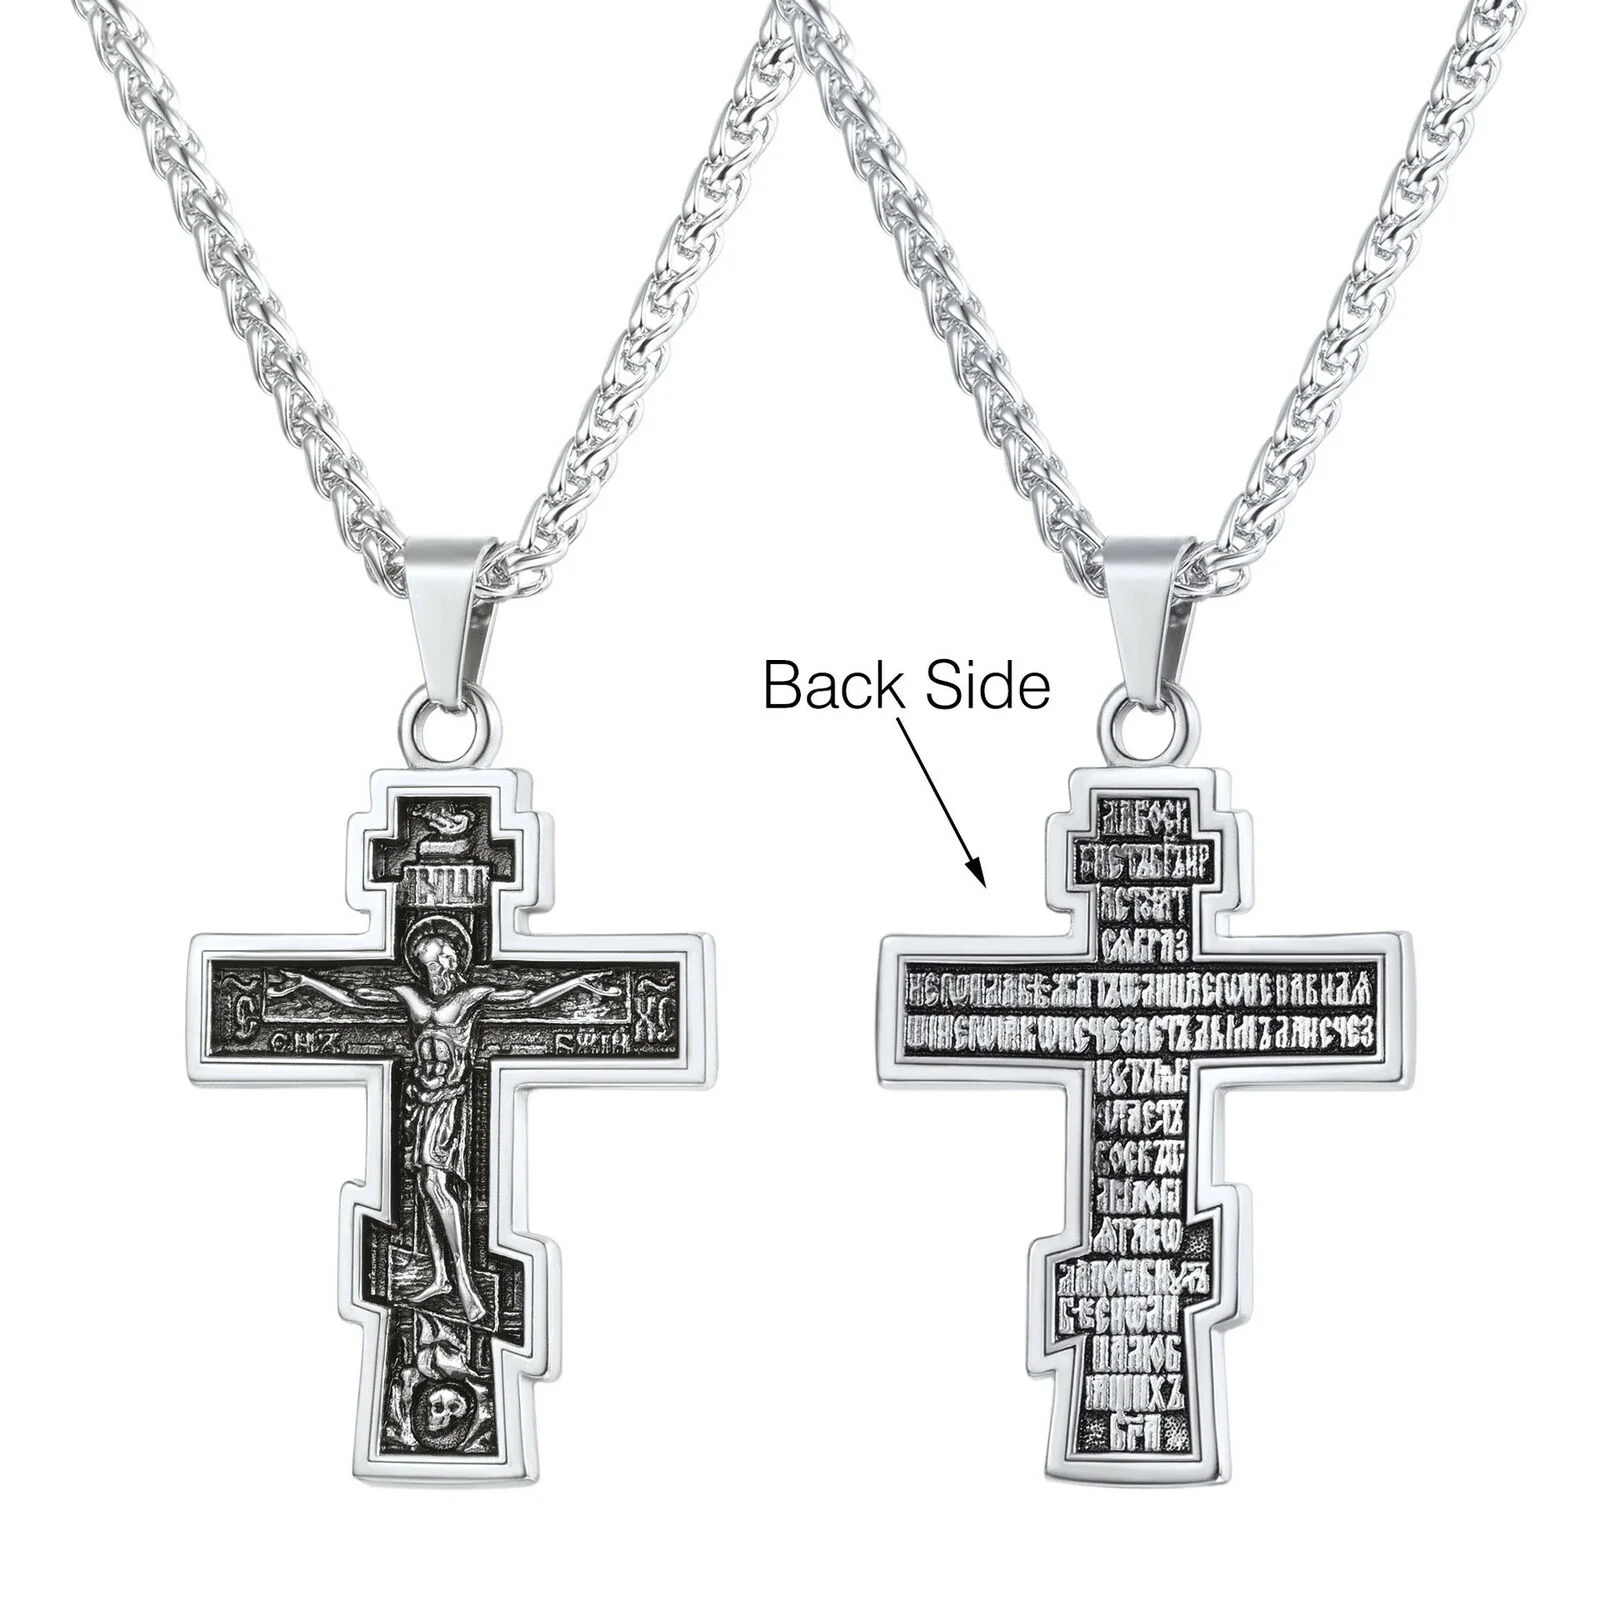 Tarnish free gold plated stainless steel faith trust orthodox cross necklace for woman